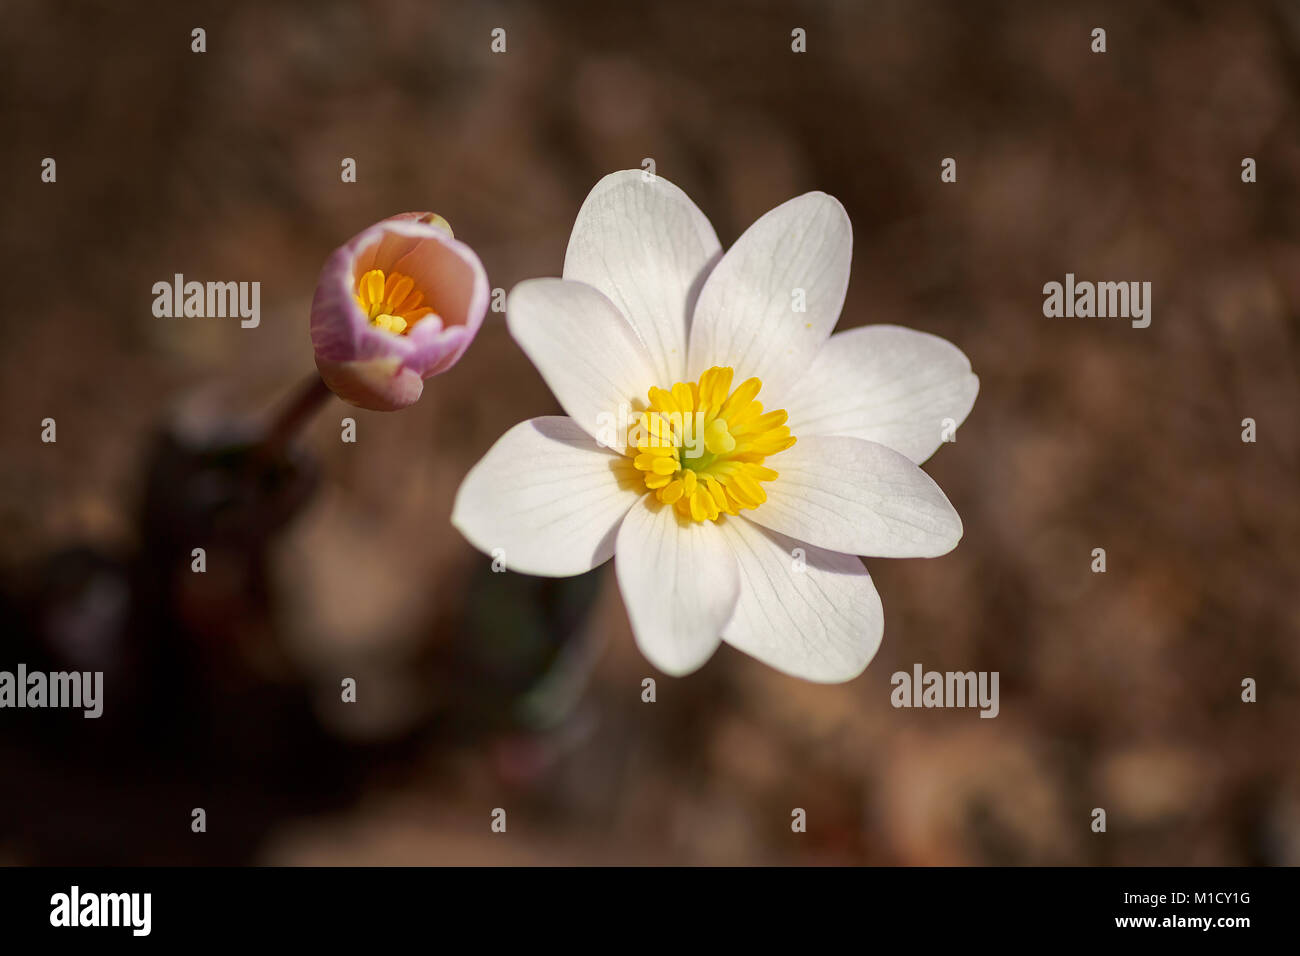 Sanguinaria canadensis or bloodroot is a plant native to eastern North America. Stock Photo